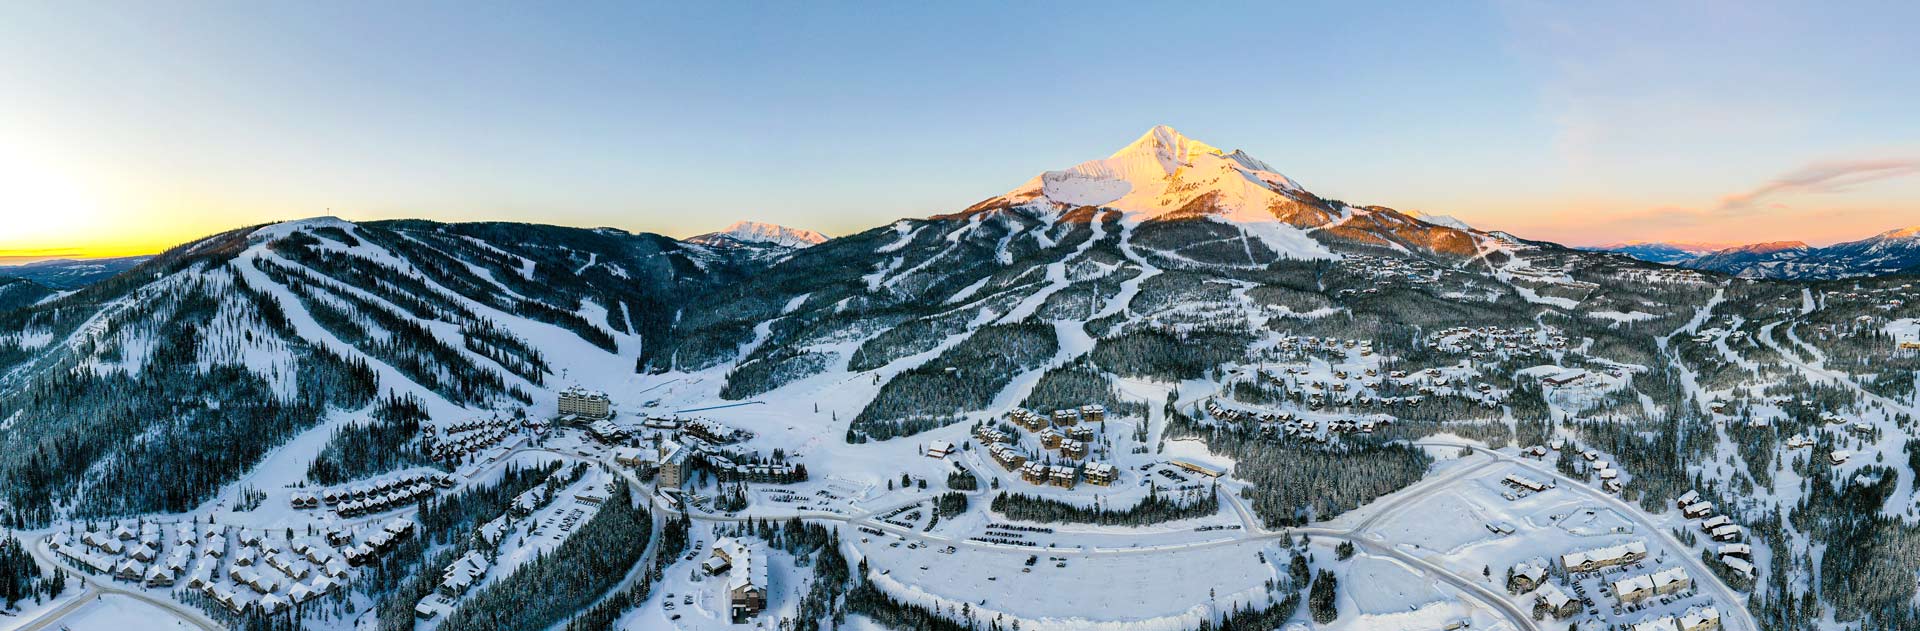 Wide-angle view of Big Sky Resort and Lone Mountain